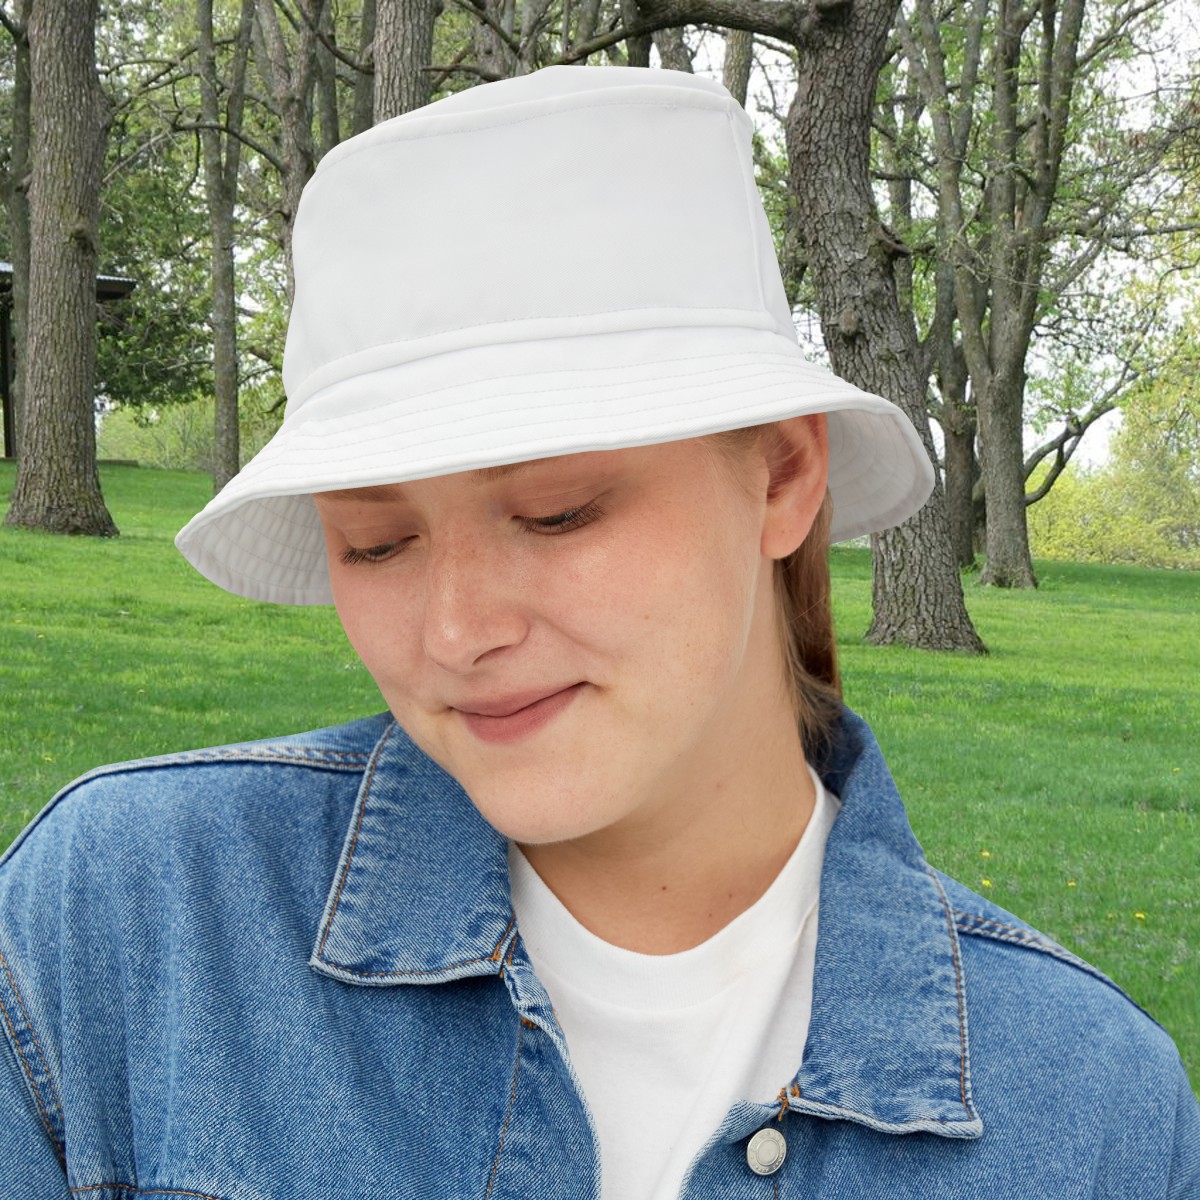 THE ZOO Bucket Hat (White) product thumbnail image